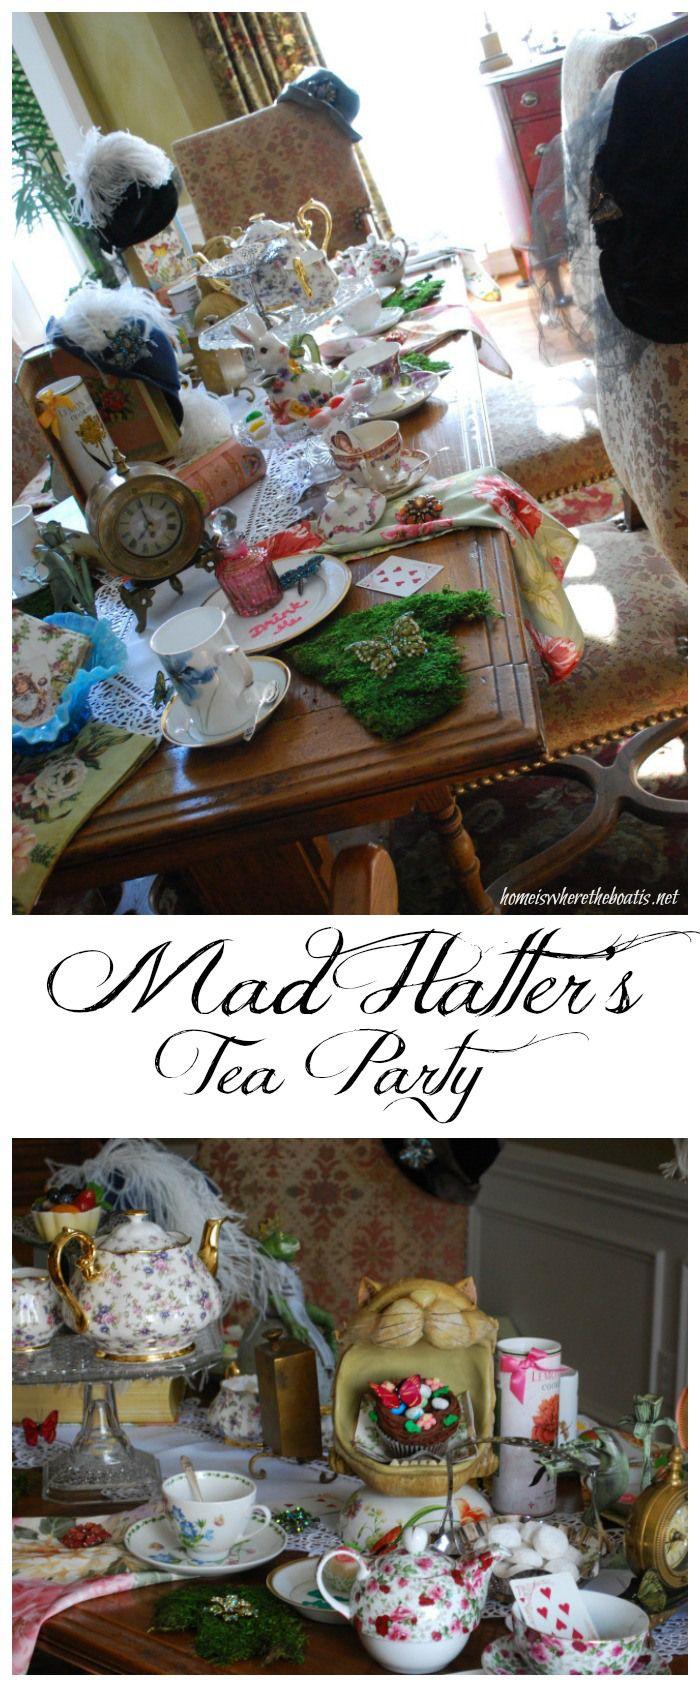 Hochzeit - Through The Looking Glass: A Mad Hatter's Tea Party